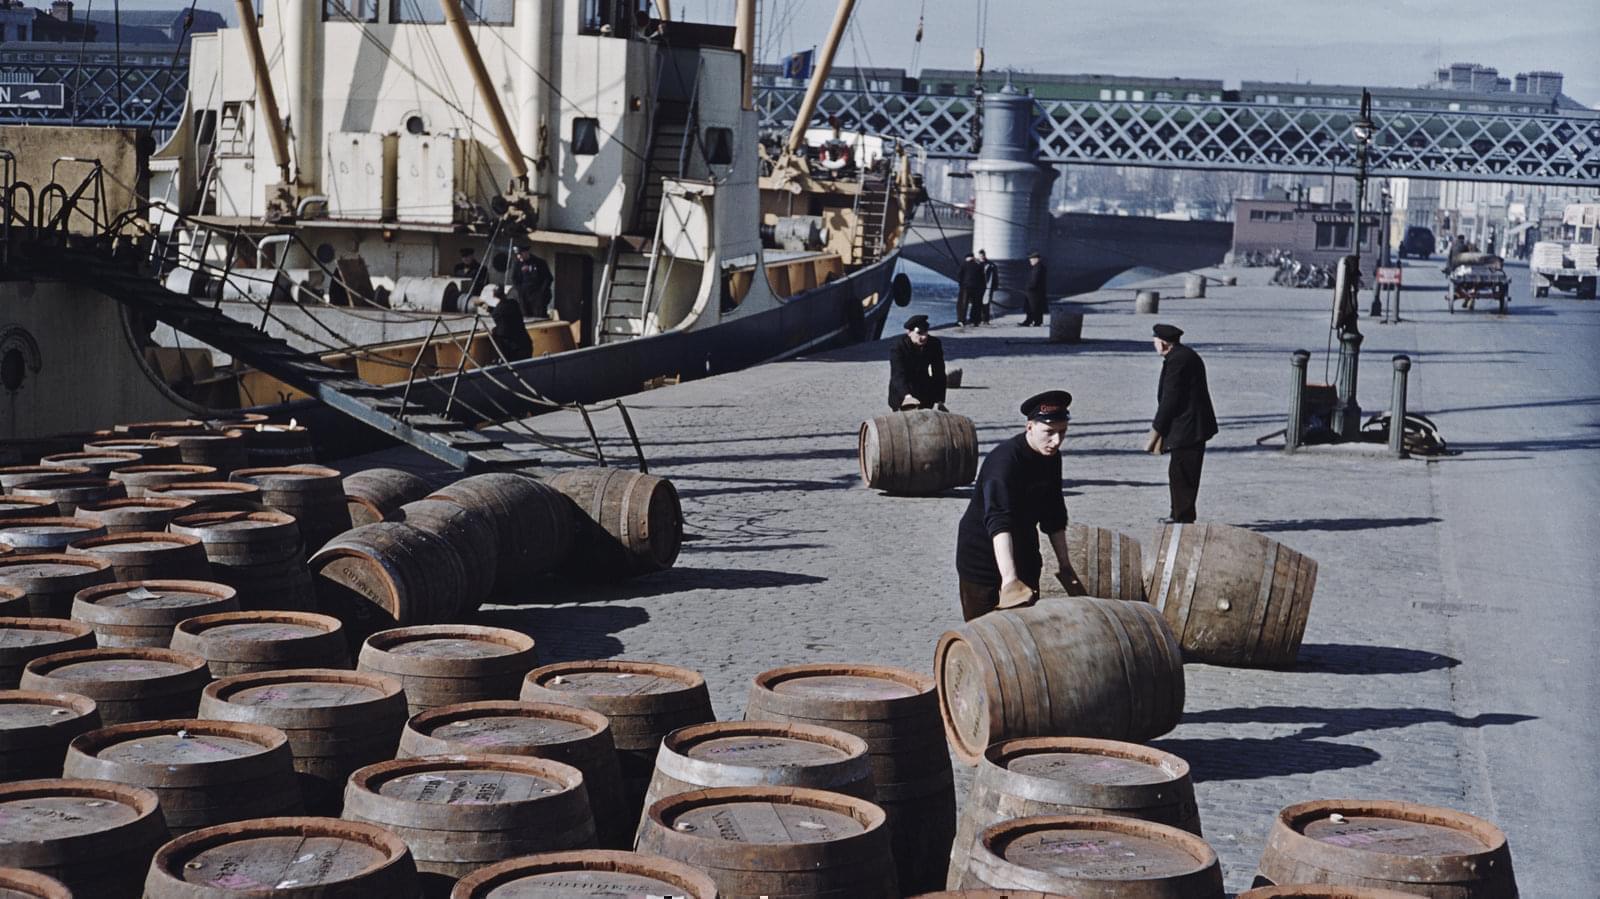 Workers roll potentially lifesaving barrels of Guinness in June 1955 on a quayside in Dublin.
